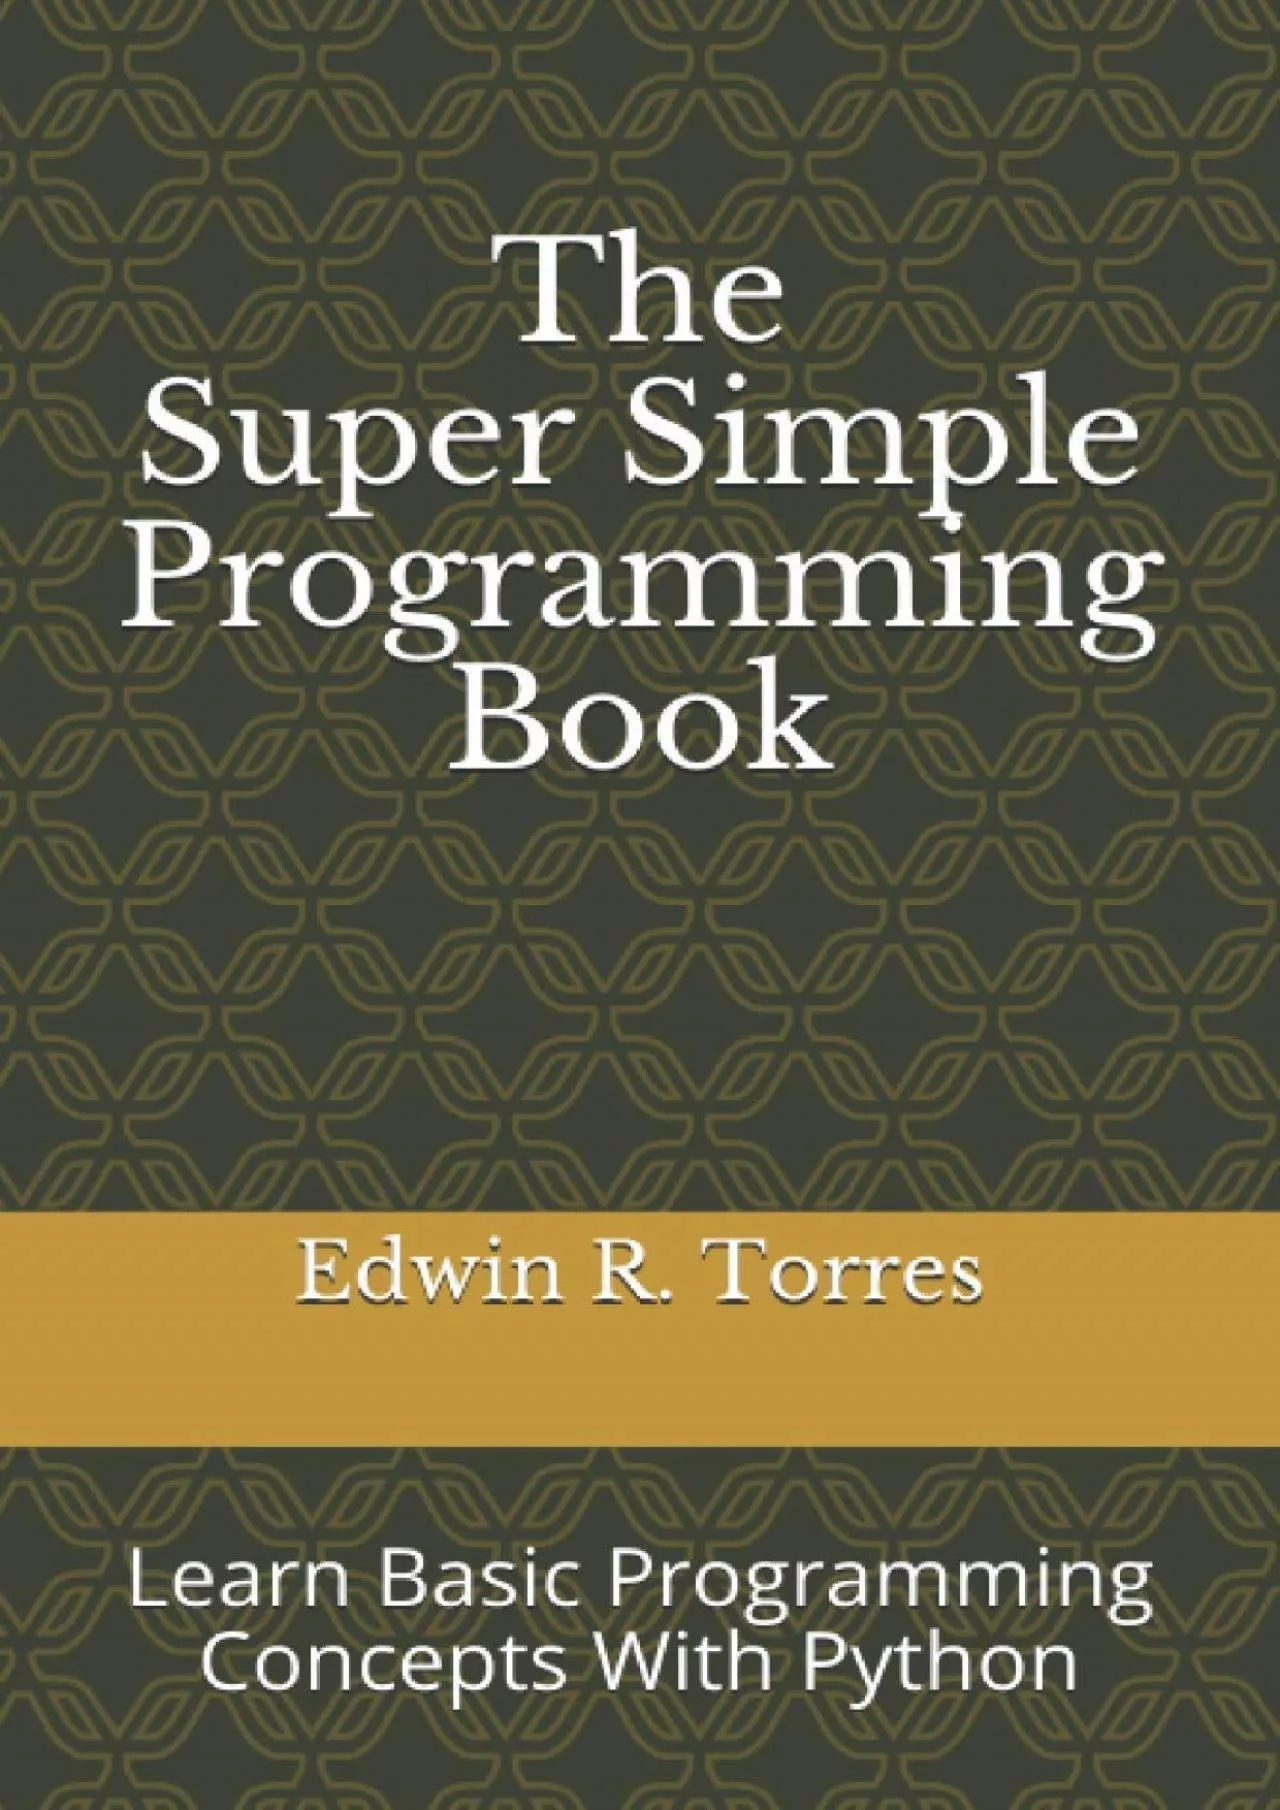 [DOWLOAD]-The Super Simple Programming Book: Learn Basic Programming Concepts With Python